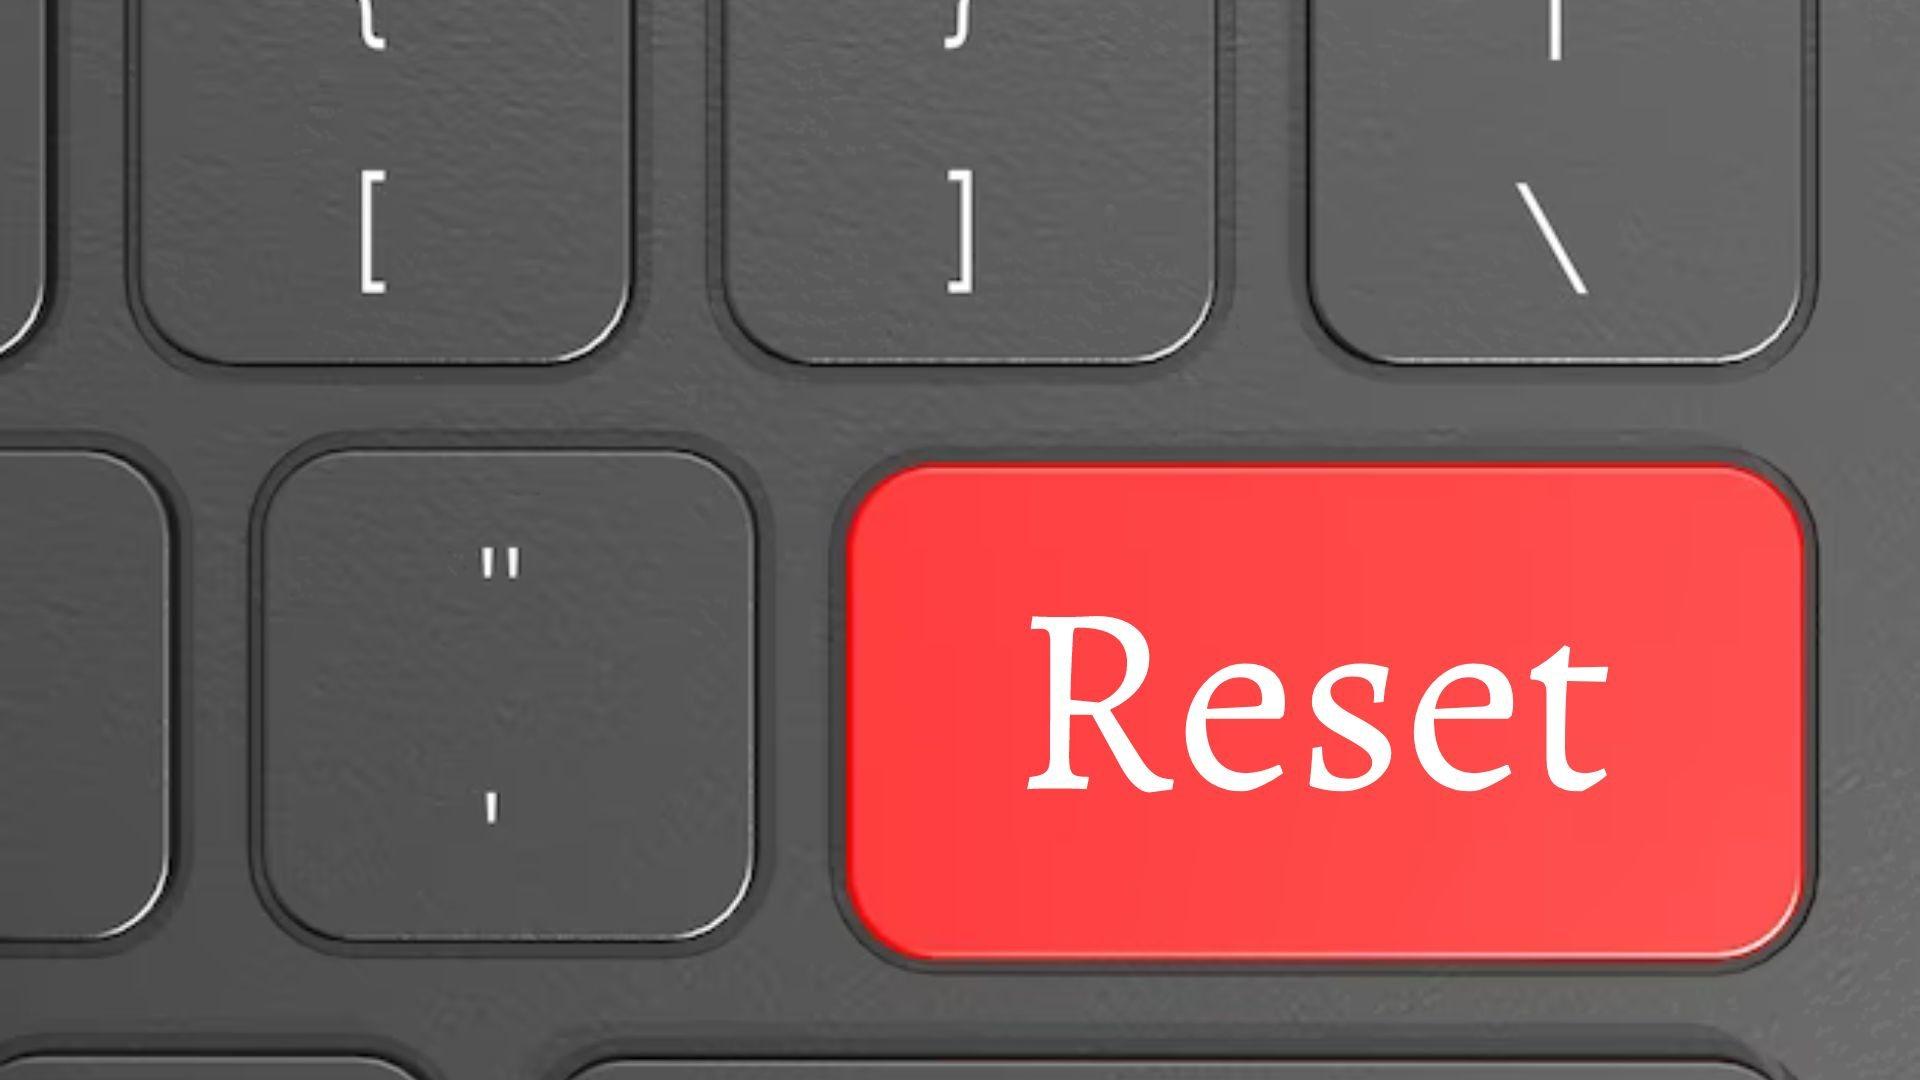 Hit the reset Button to reset your Logitech keyboard